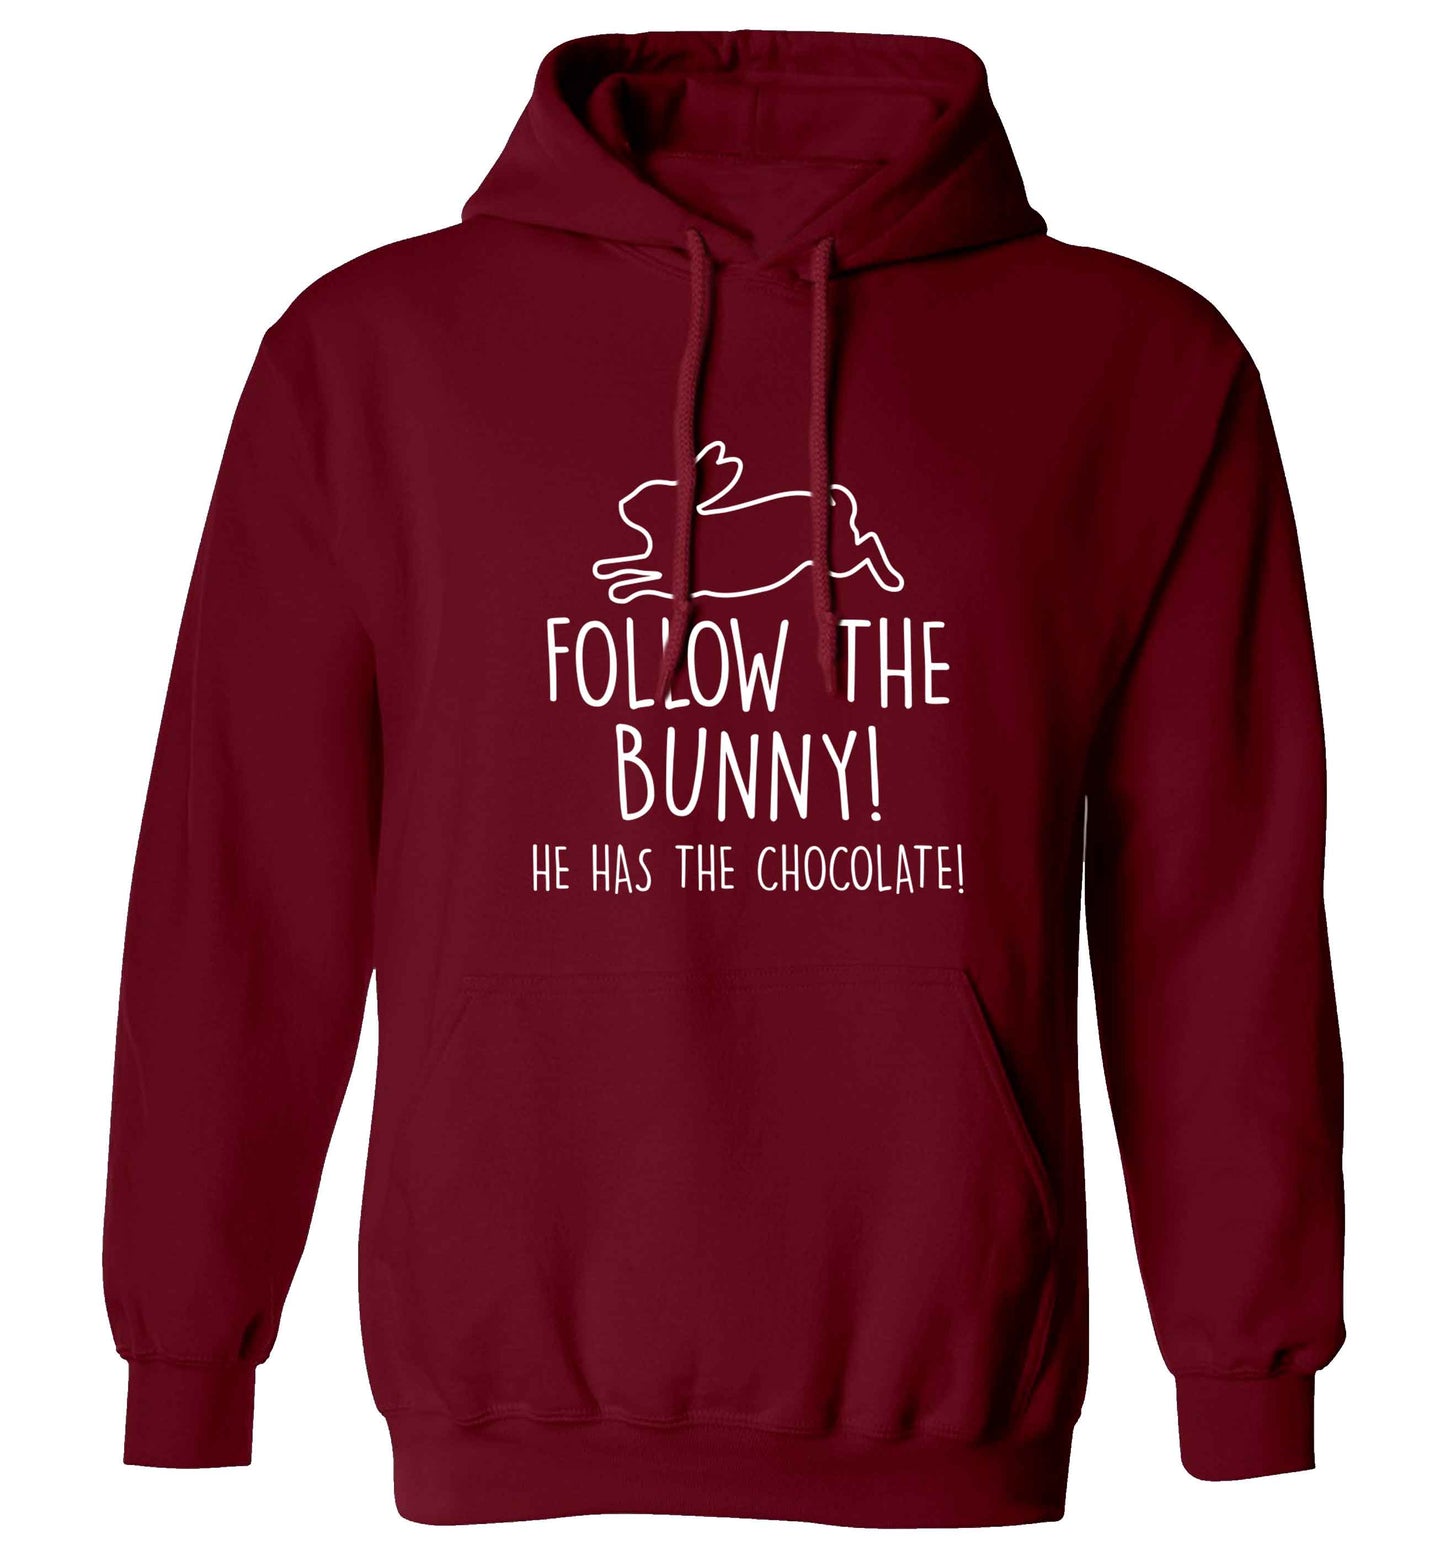 Follow the bunny! He has the chocolate adults unisex maroon hoodie 2XL